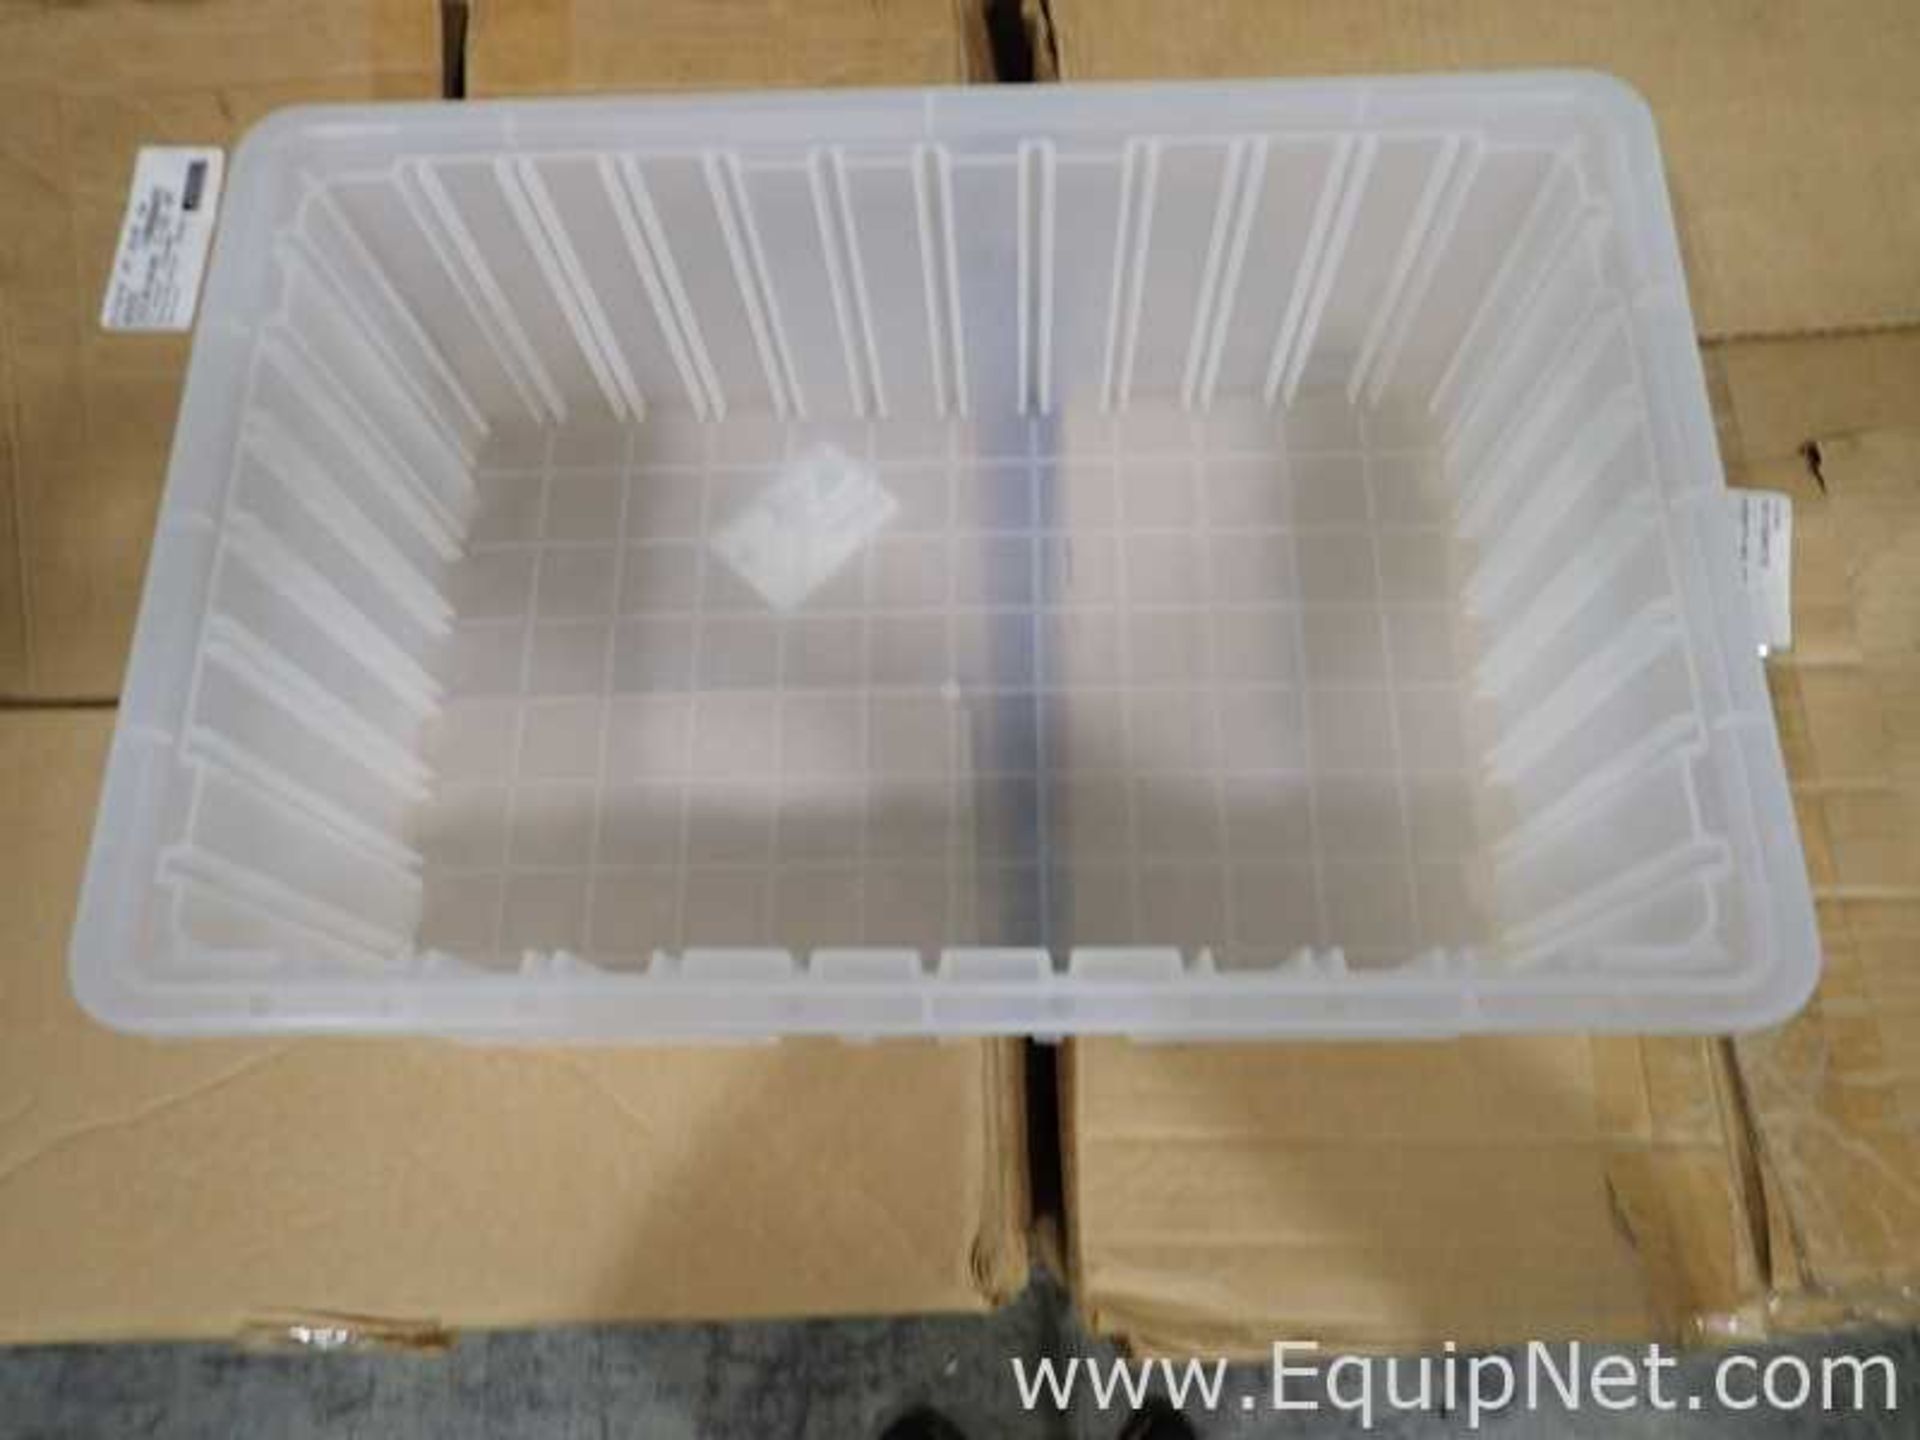 Lot of Approximately 55 Quantum Storage Systems DG92060CL Clear Dividable Grid Containers - Image 4 of 10